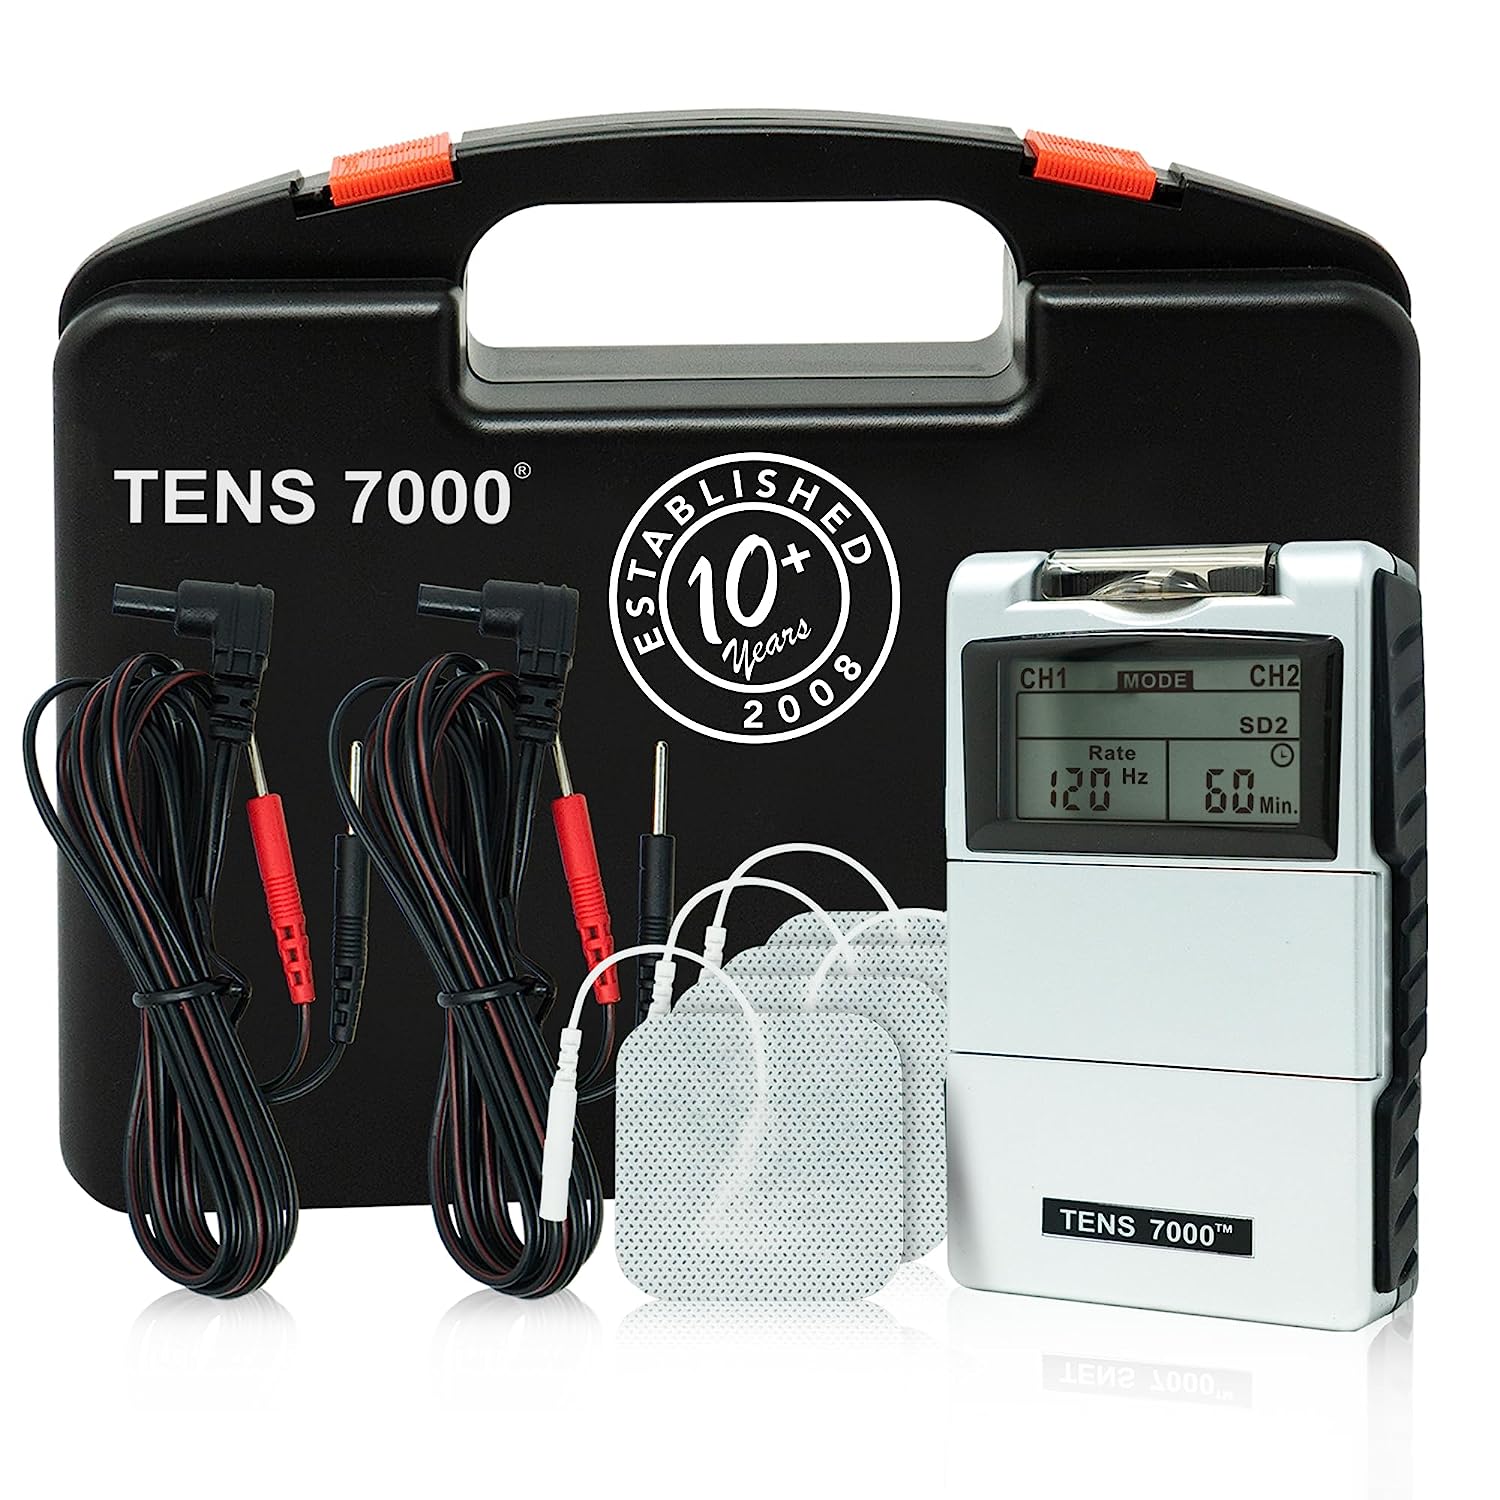 TENS 7000 Digital TENS Unit with Accessories - TENS [...]